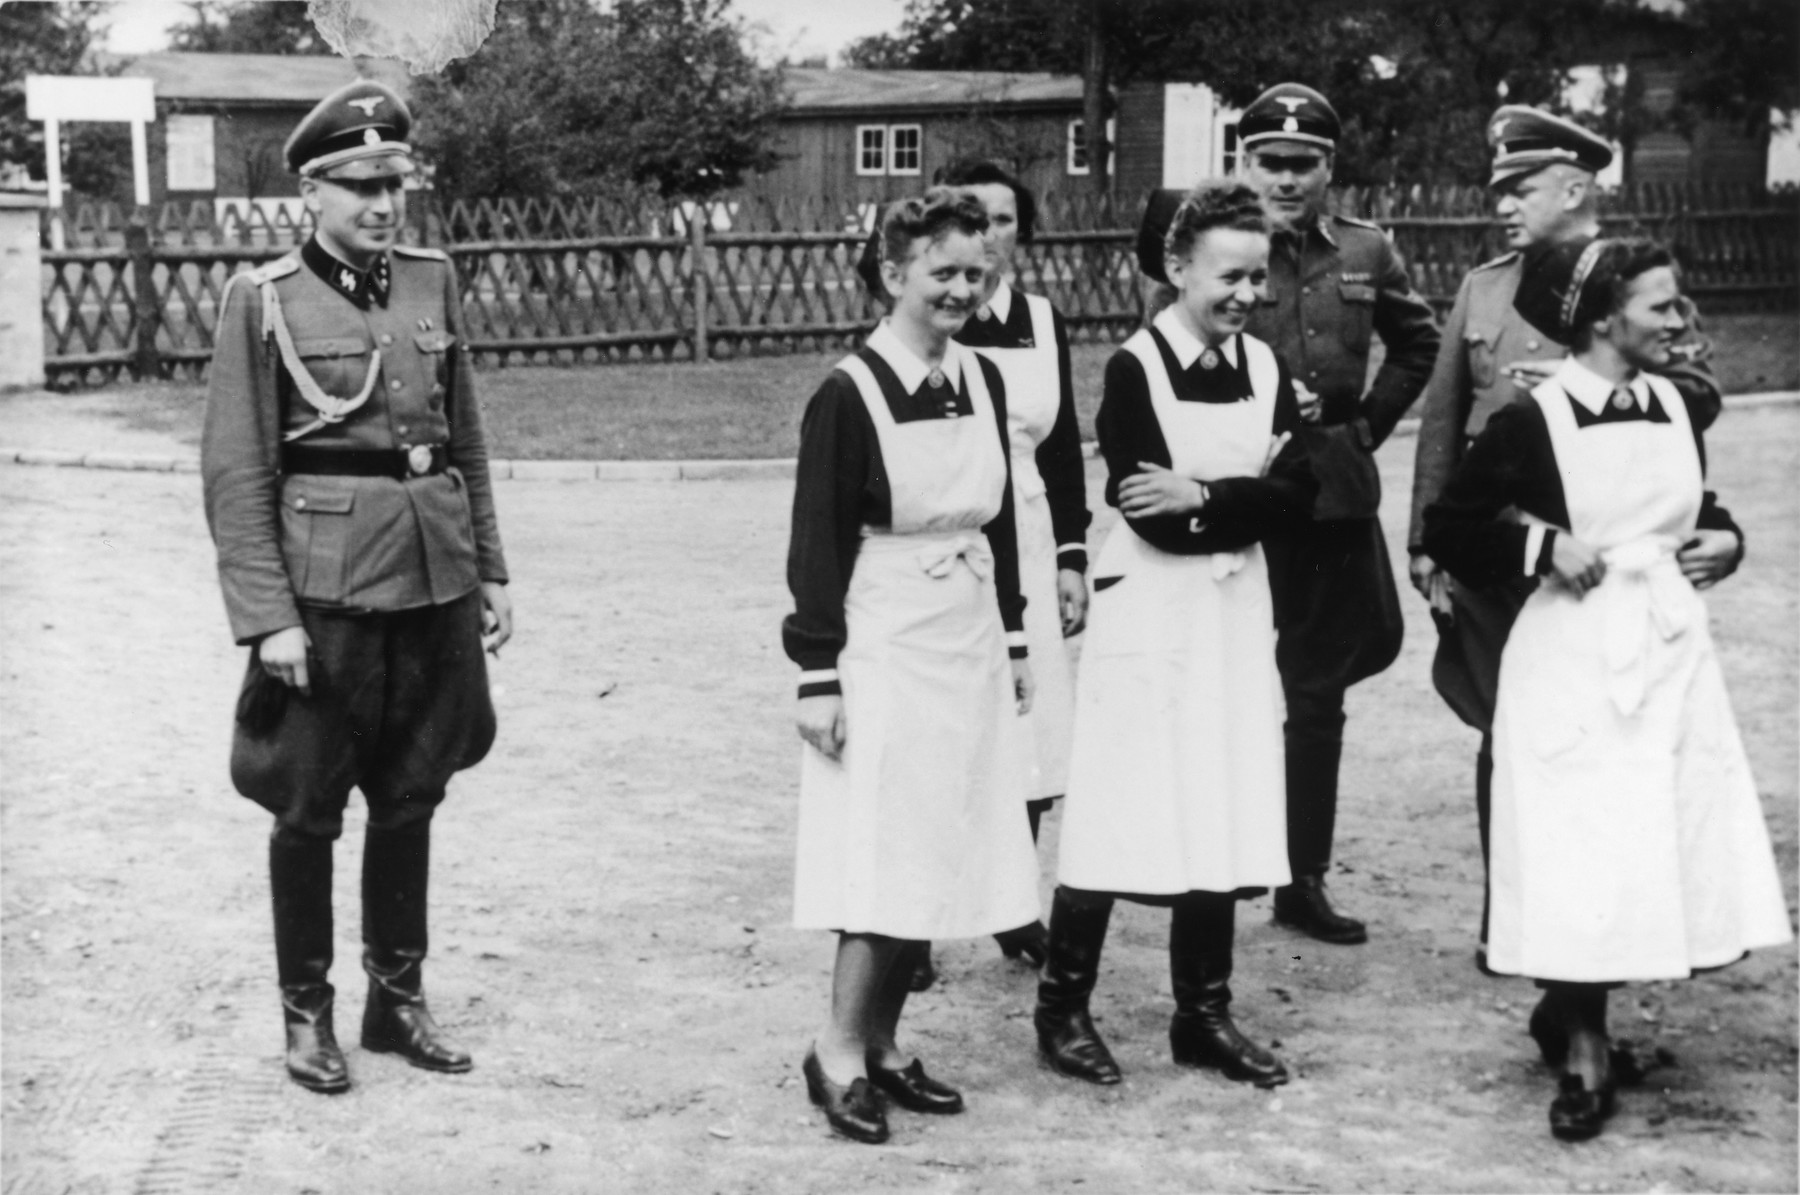 SS officers and German nurses gather during the dedication ceremony of the new SS hospital in Auschwitz.

Among those pictured are Karl Hoecker, Josef Kramer and SS-Hauptsturmfuhrer Heinrich Schwarz.  Among the nurses probably are Martha Mzyk and Lotte Nitschke.